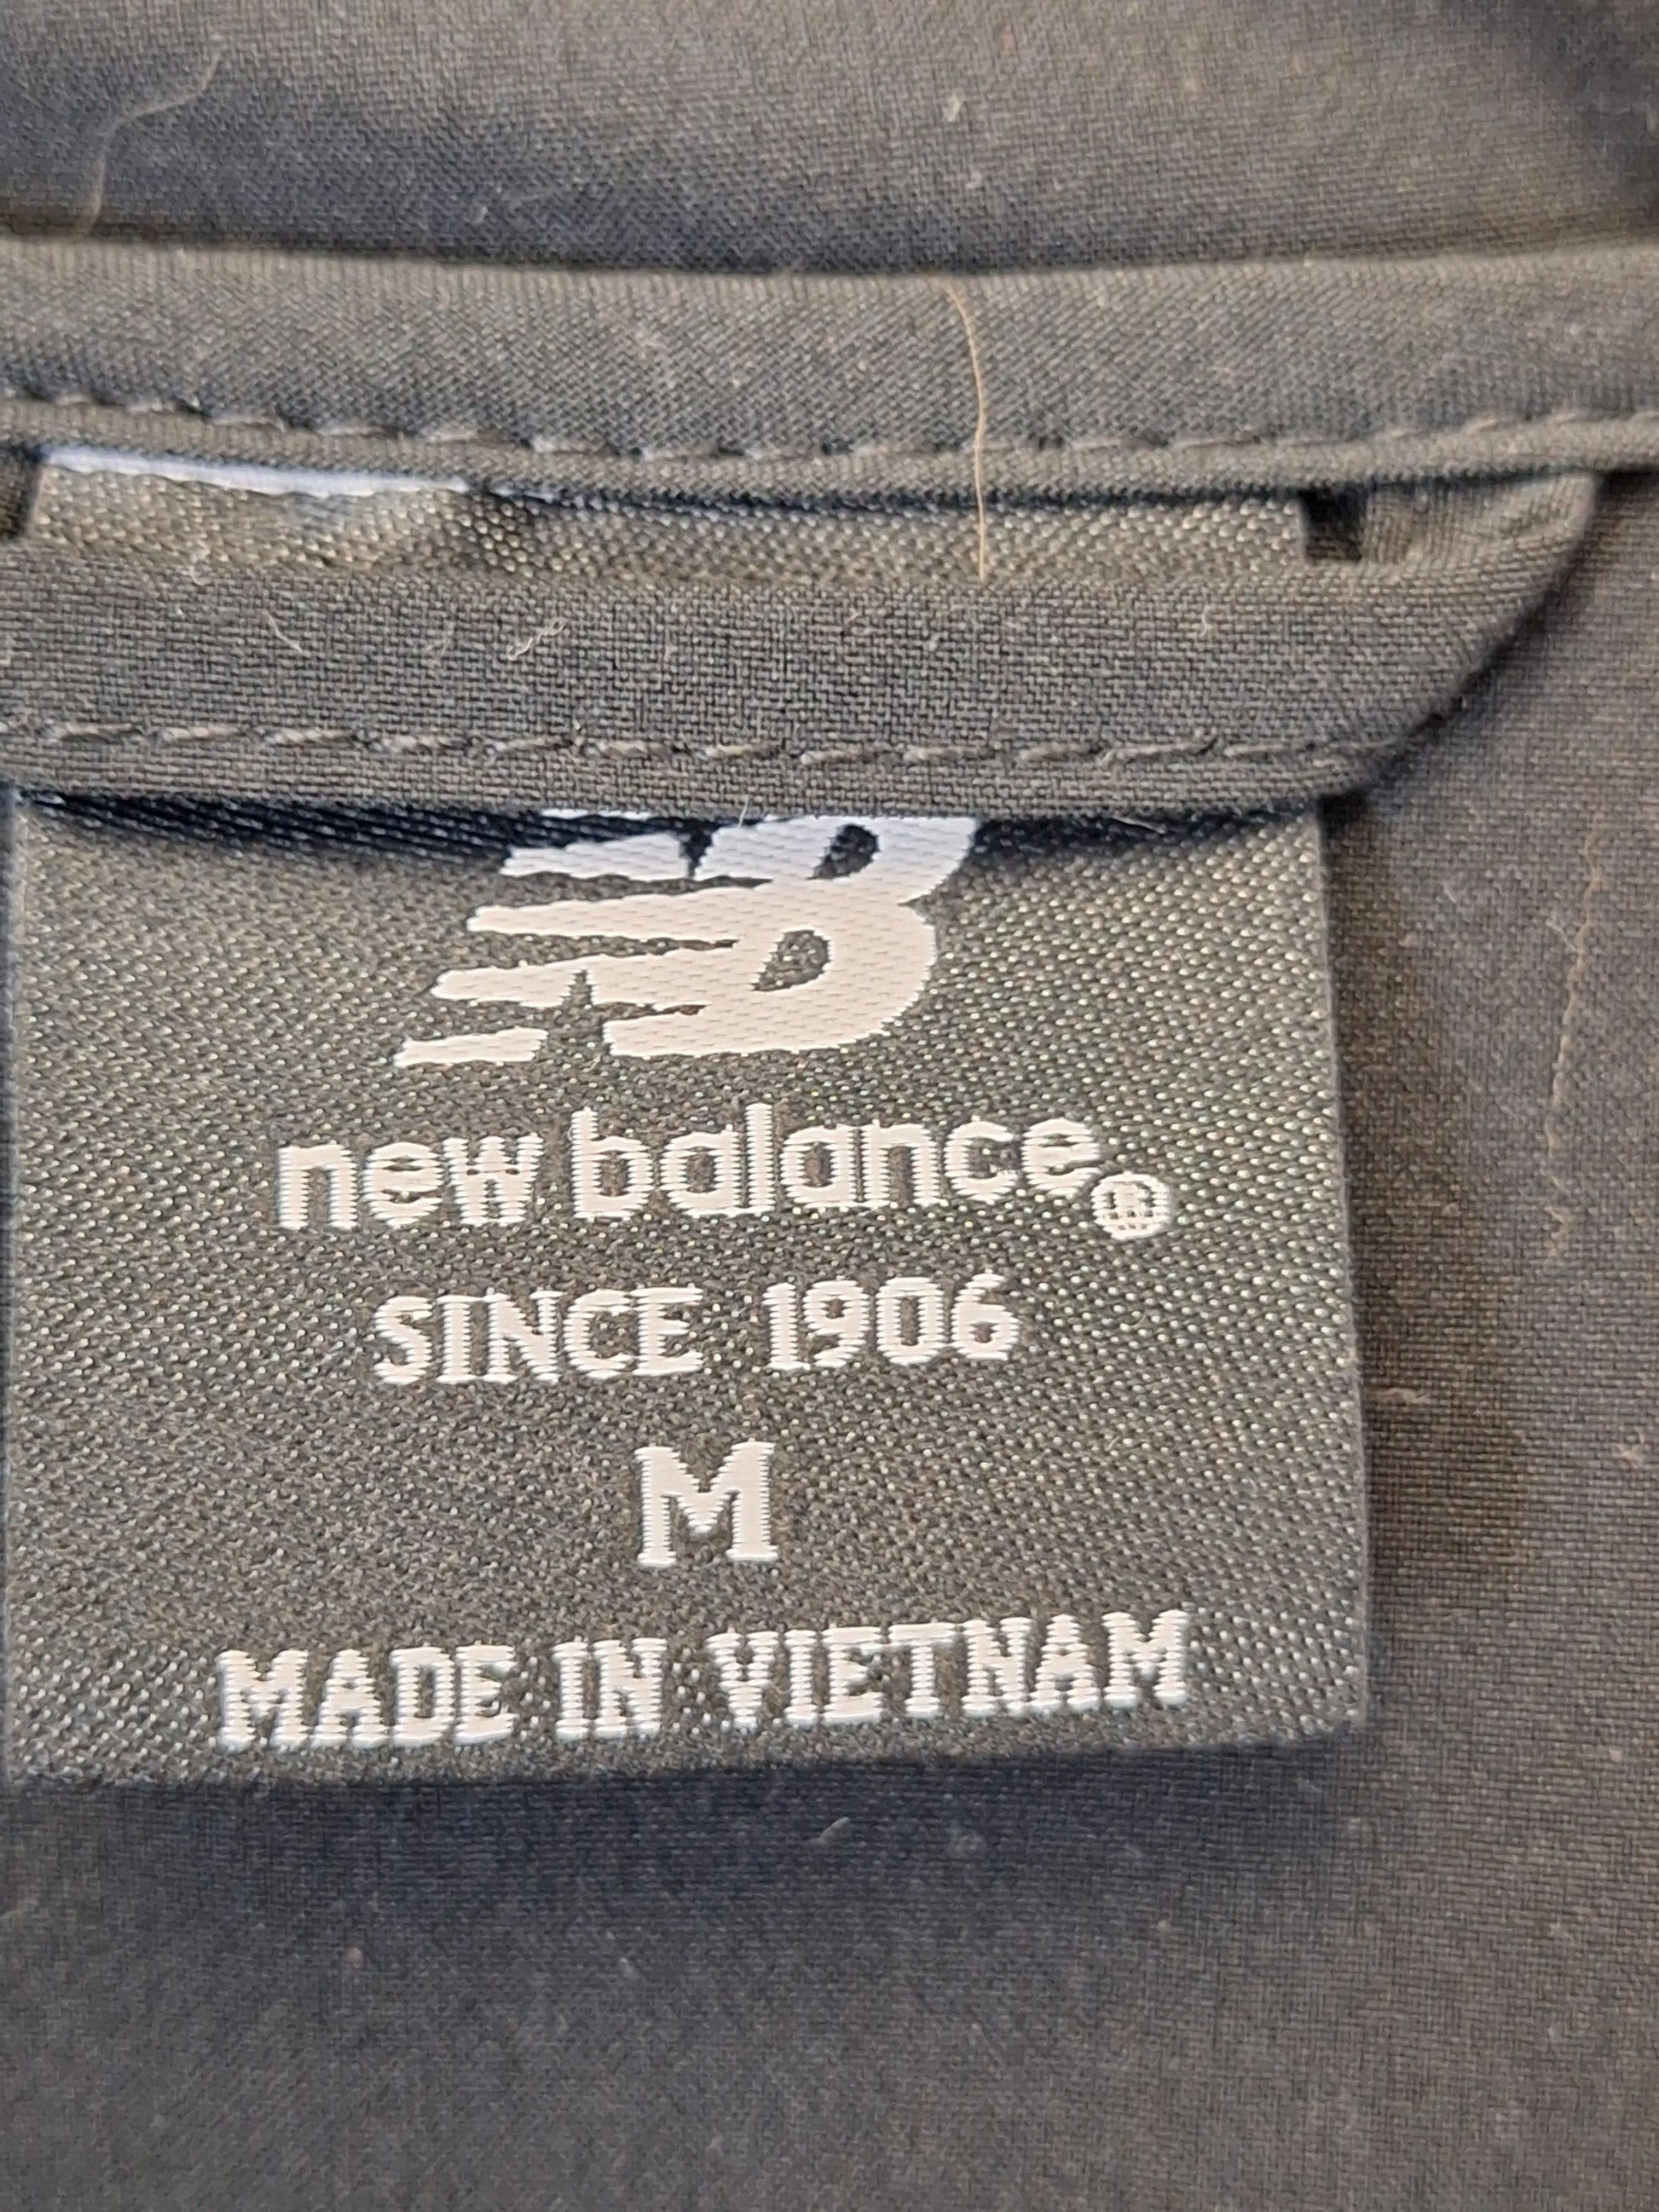 New Balance Lightweight Packable Hooded Top Size M by SwapUp-Online Second Hand Store-Online Thrift Store